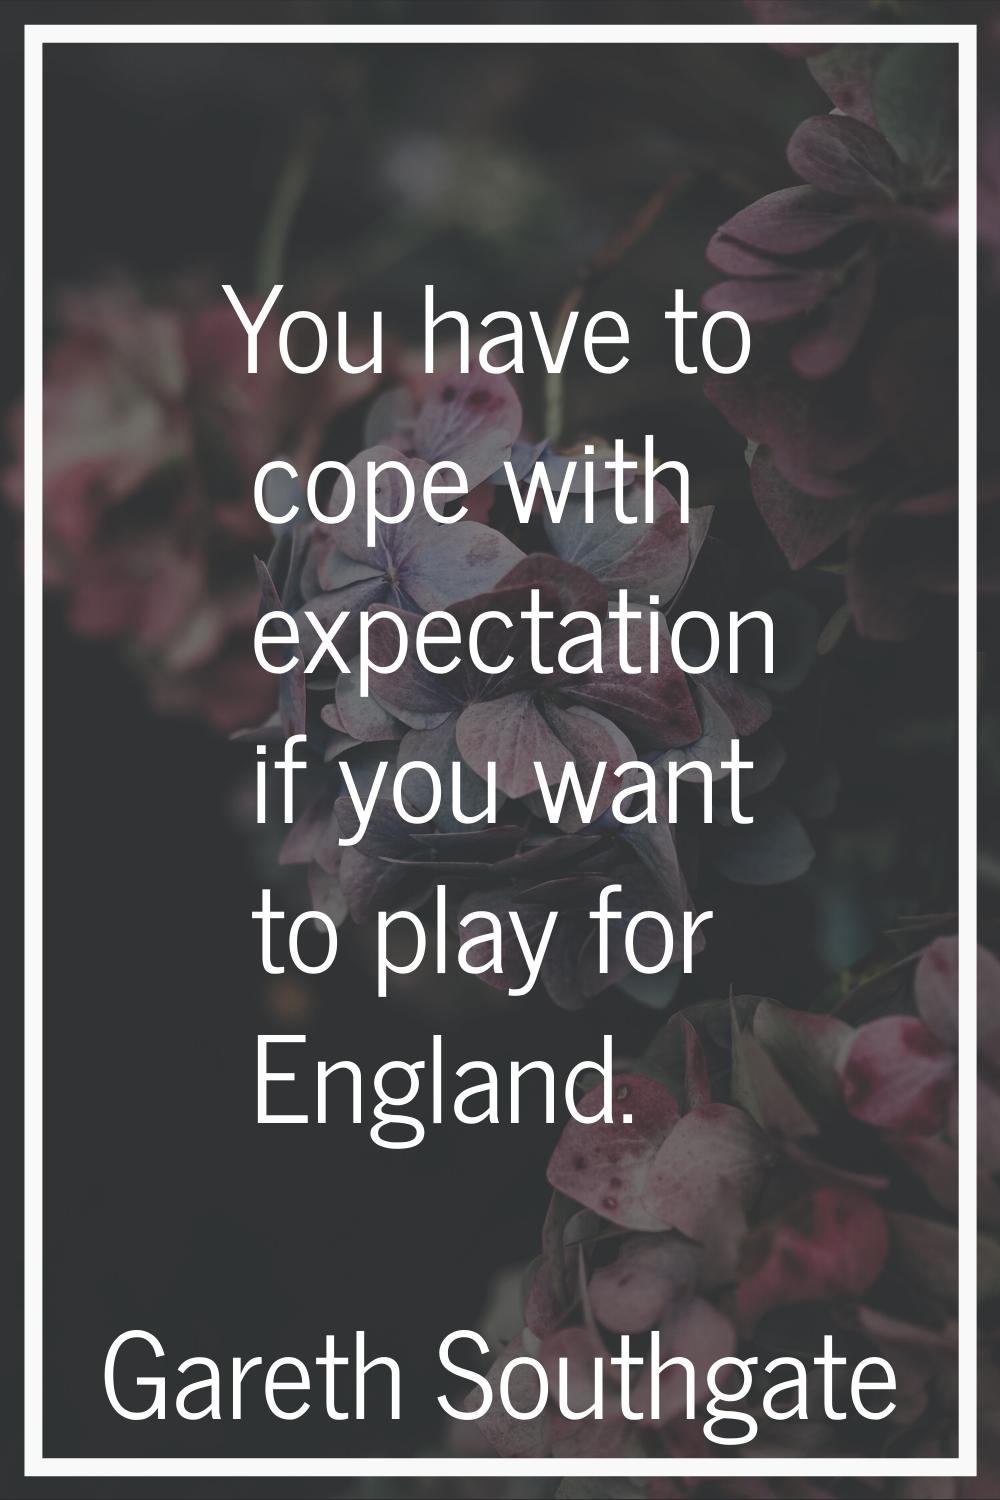 You have to cope with expectation if you want to play for England.